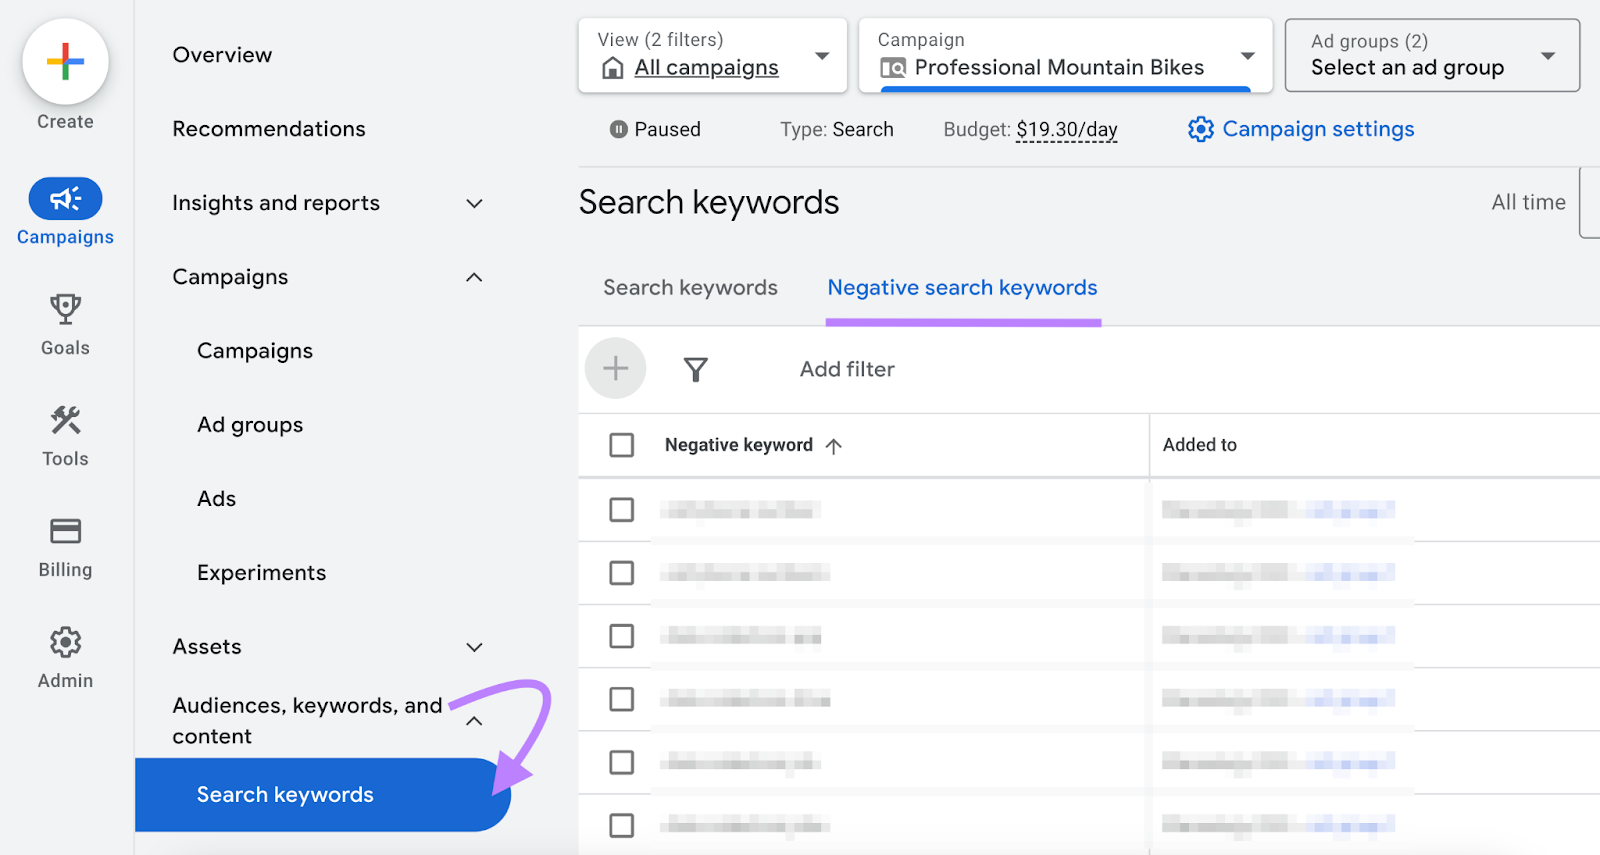 "Negative search keywords" tab selected under “Search keywords” screen